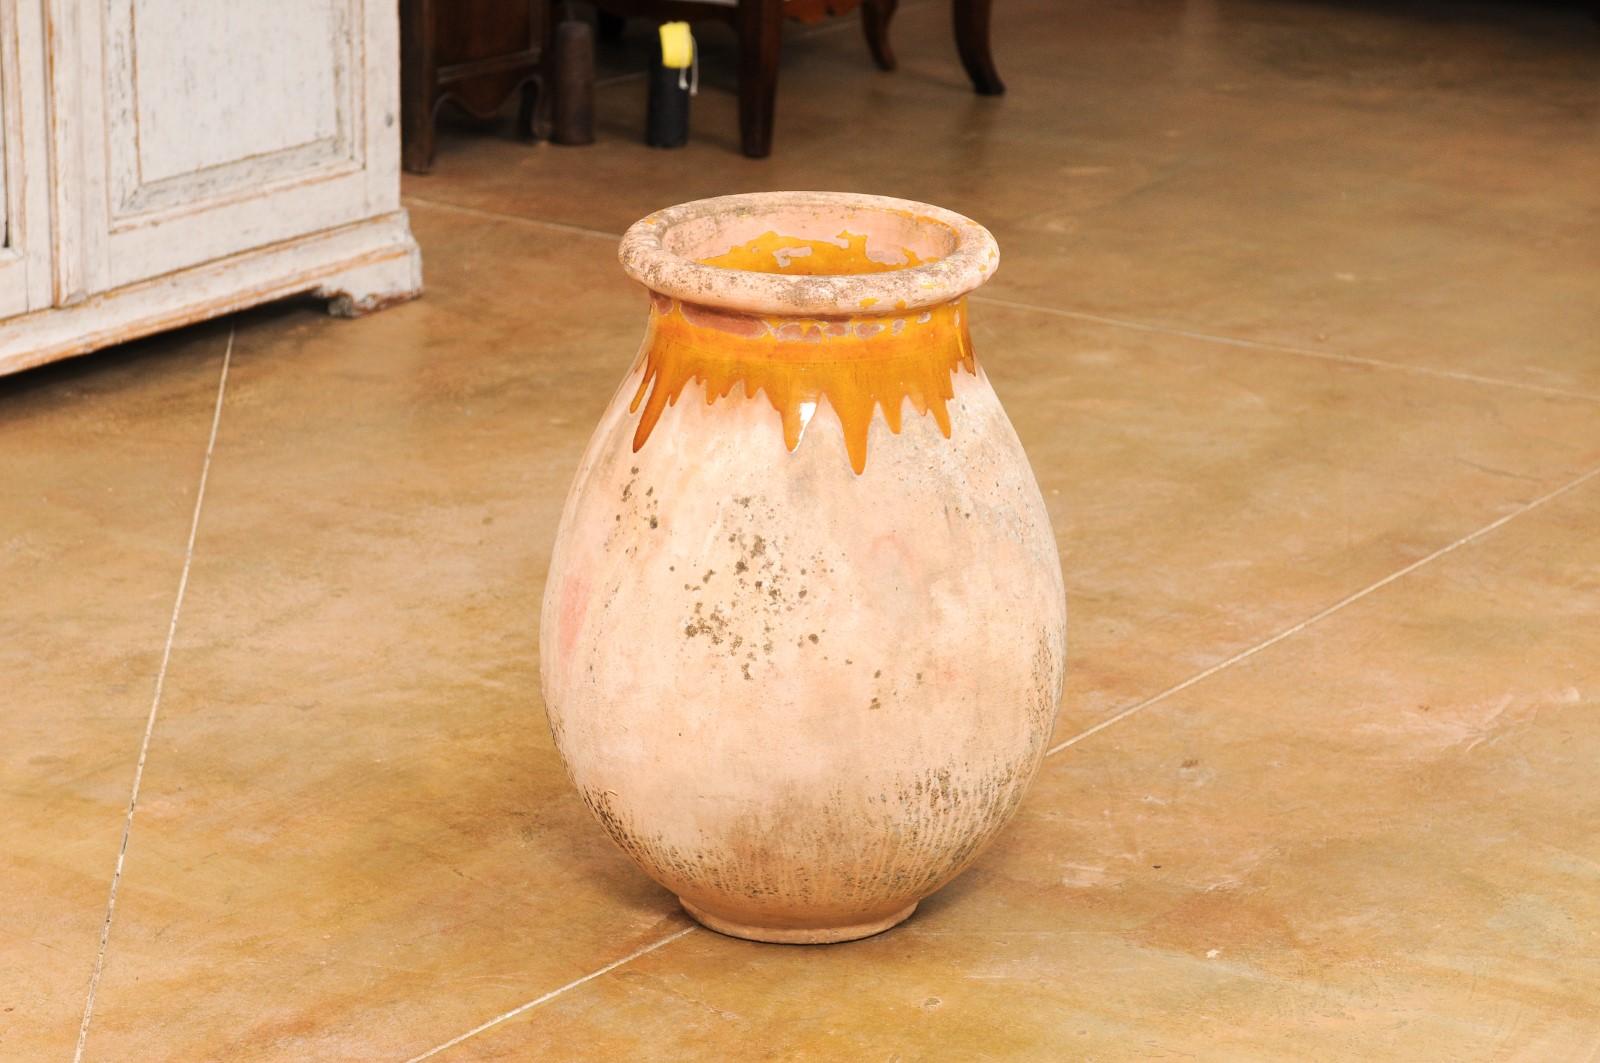 French 19th Century Biot Pottery Jar with Yellow Glaze and Dripping Effect For Sale 5